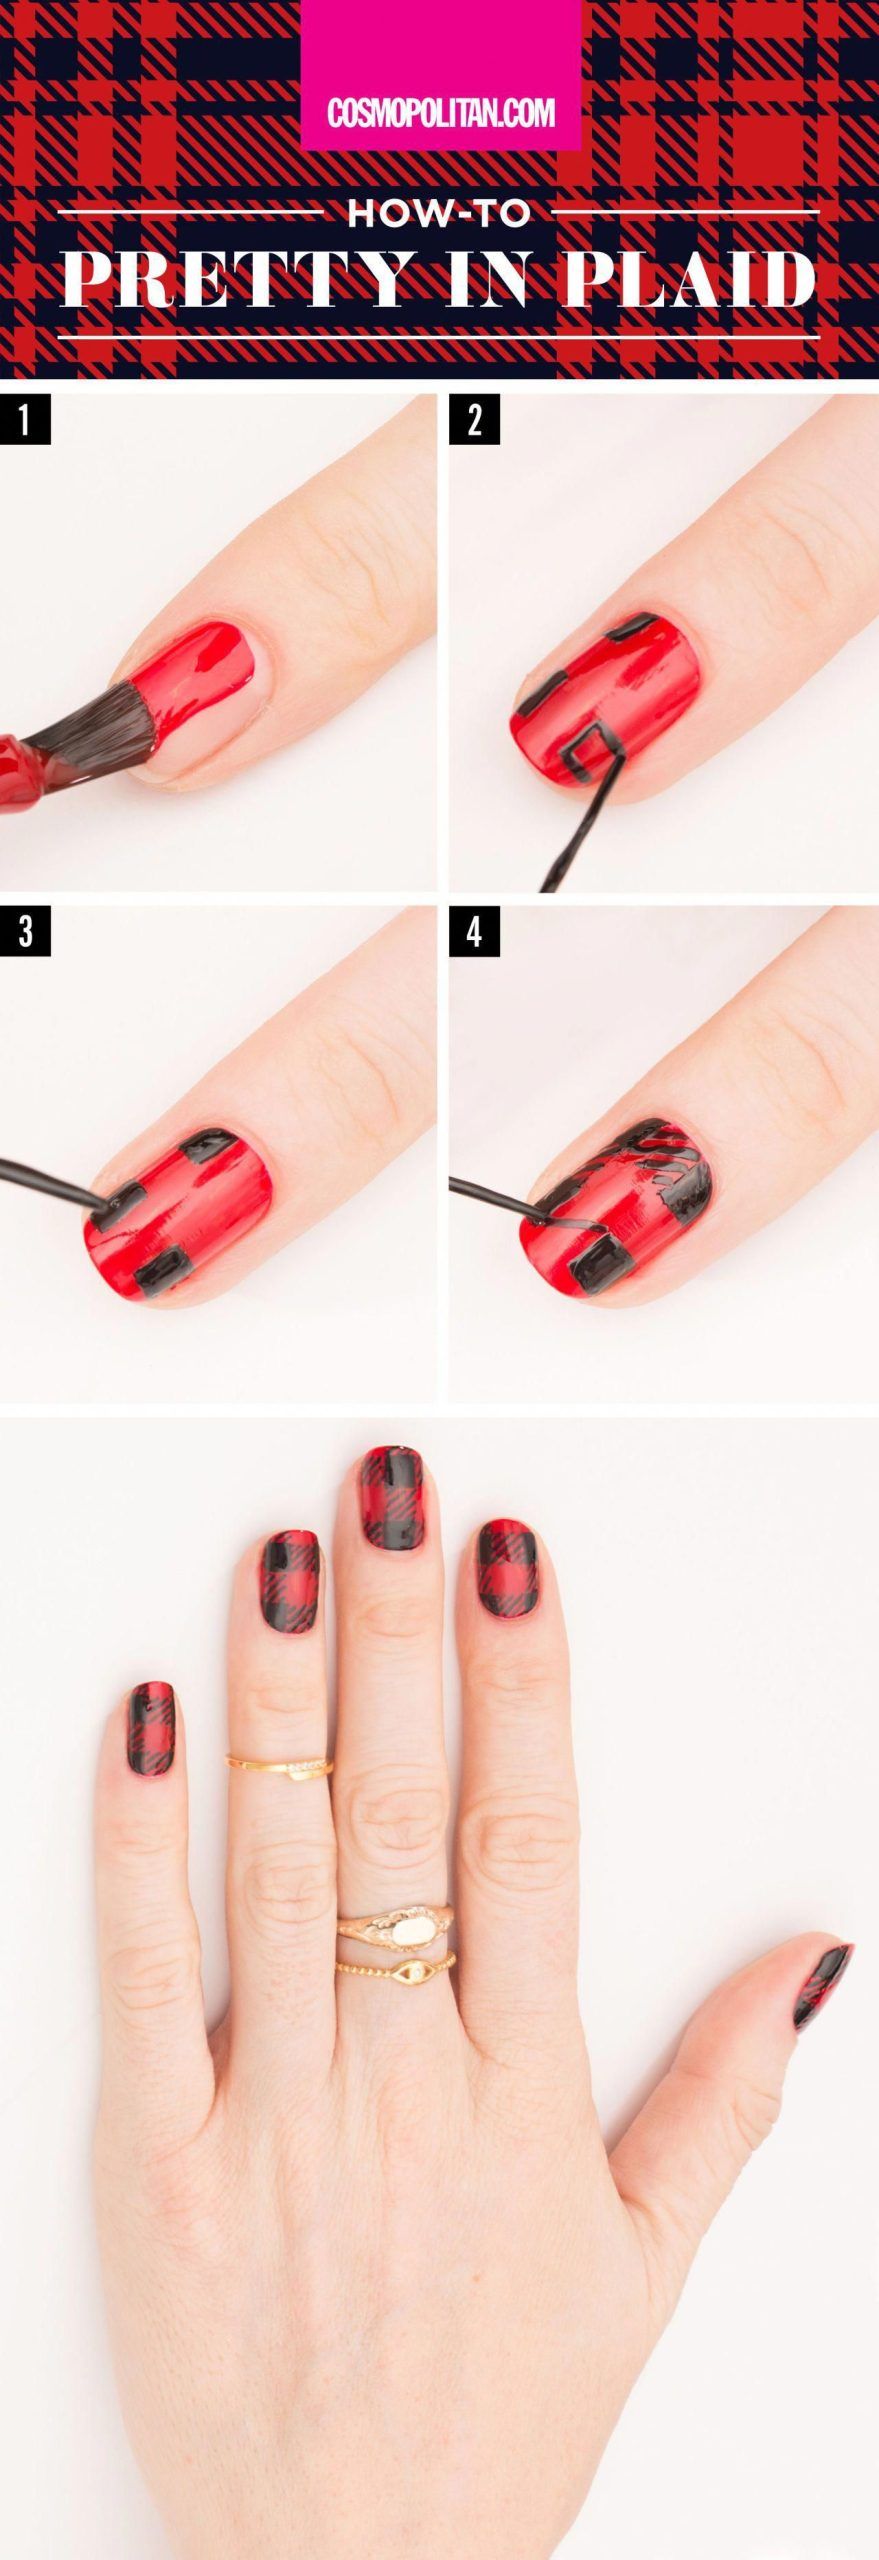 7 Holiday Nail Art Designs You Can Actually Do Yourself -   12 holiday Nails plaid ideas